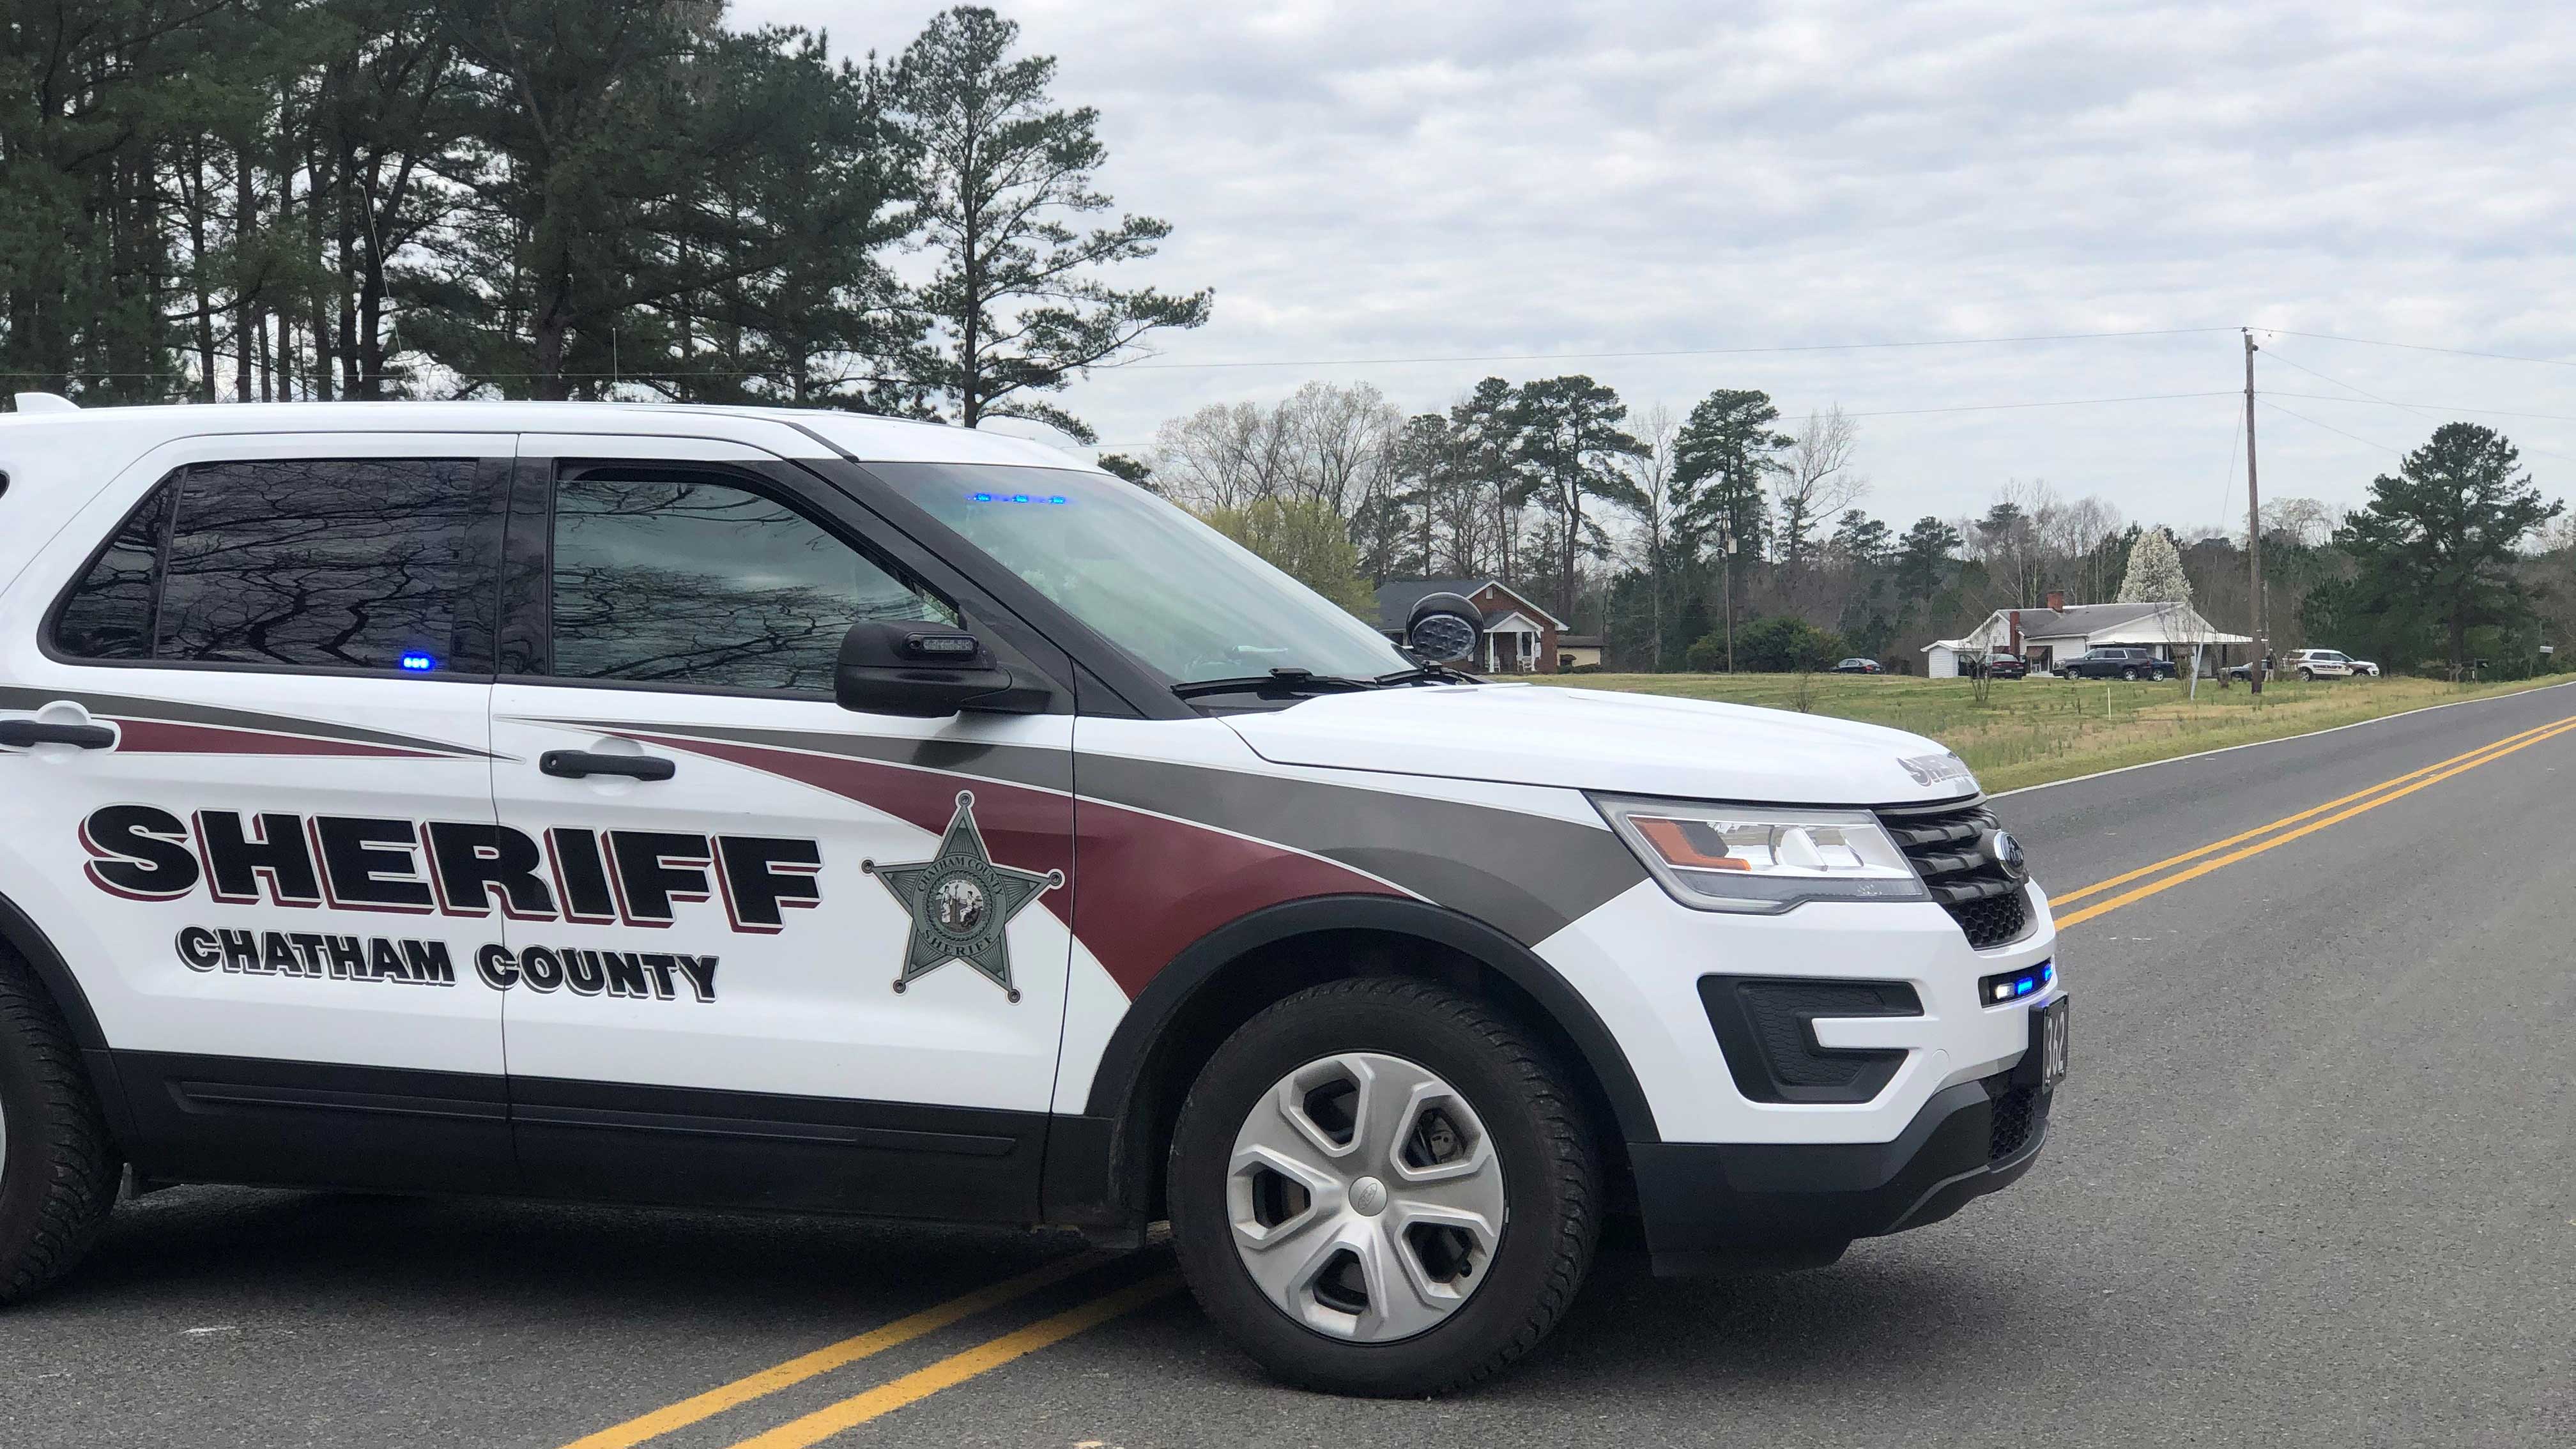 Chatham County Sheriff Arrests Chapel Hill Man over Child Sex Offenses